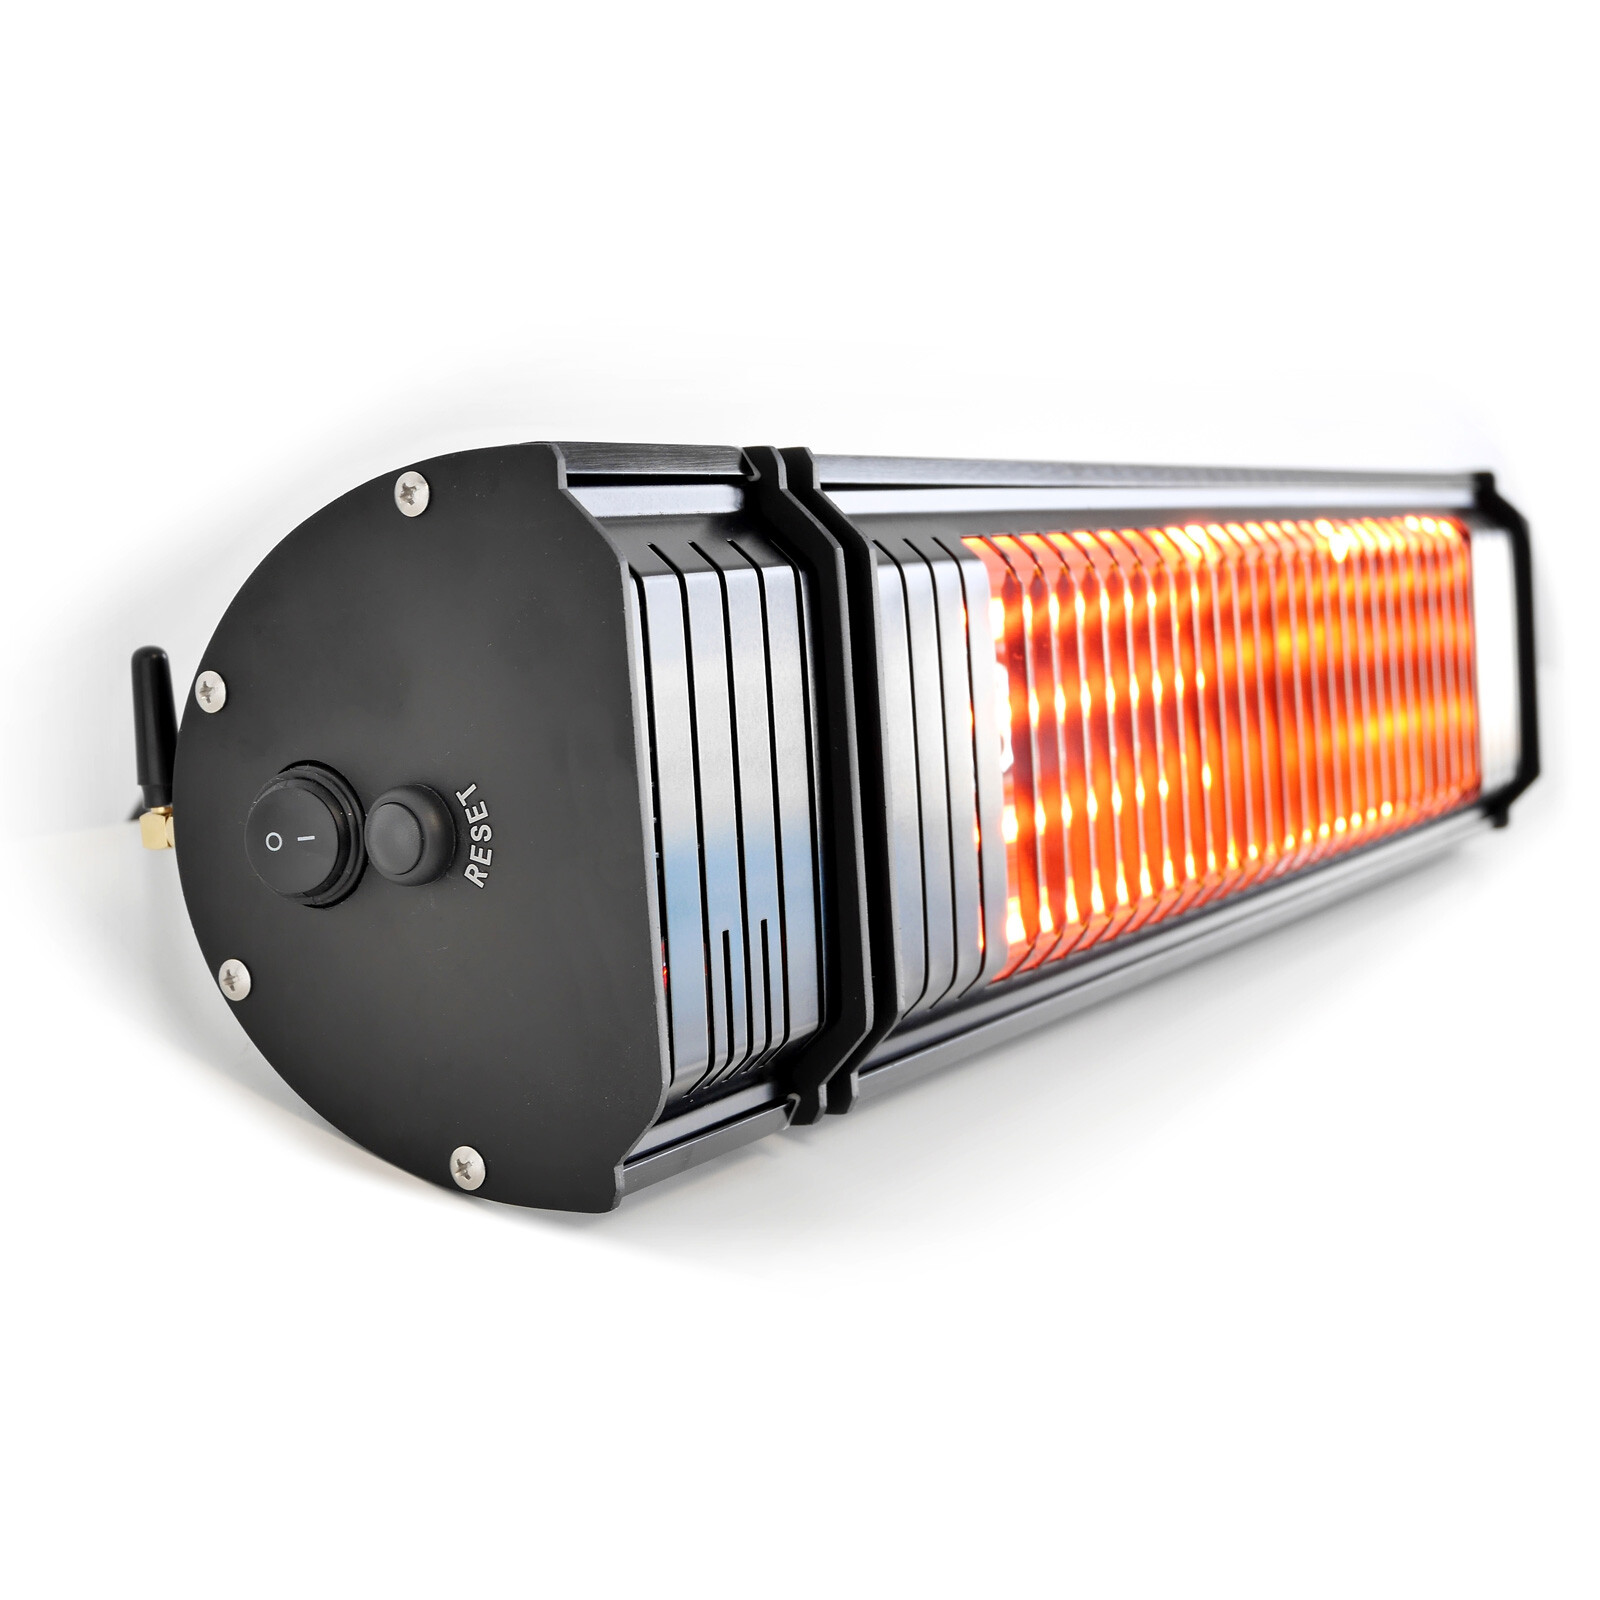 VASNER's Appino 20, infrared patio heater with bluetooth app control, side view